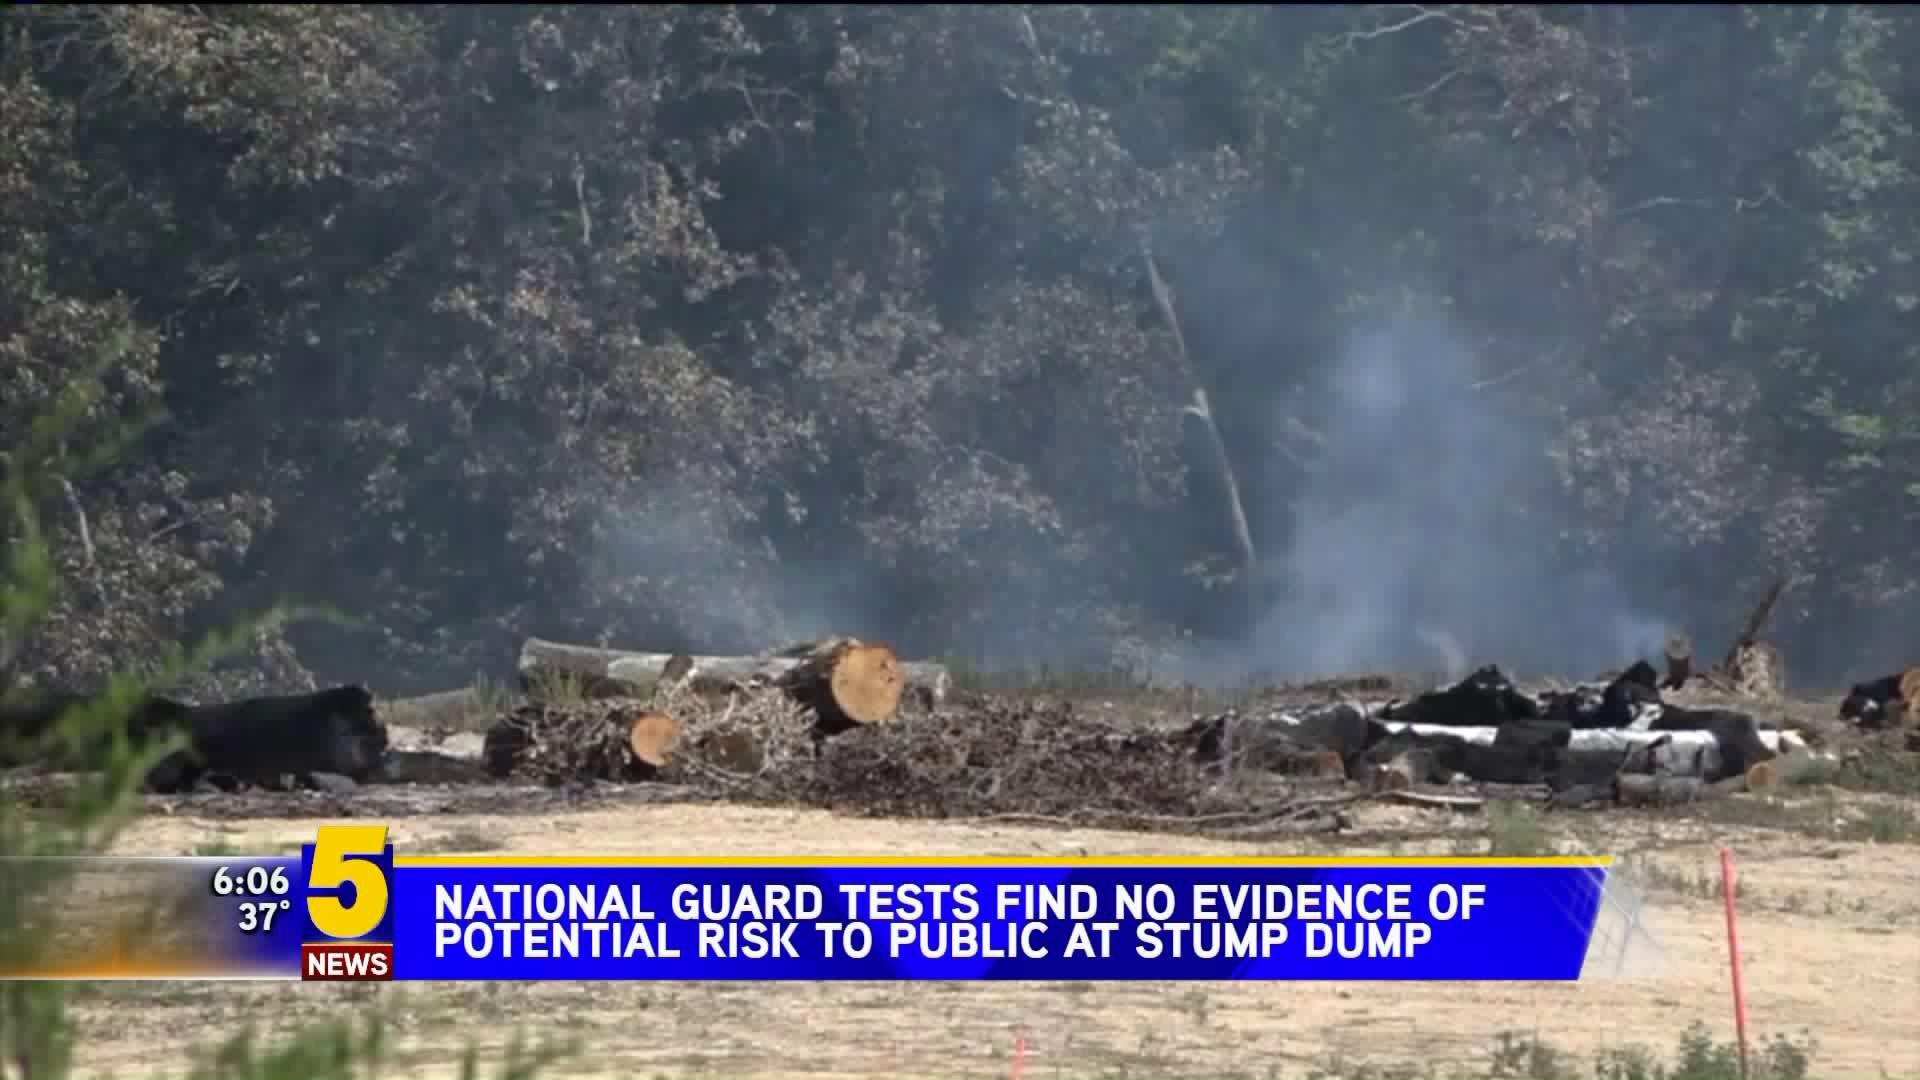 National Guard Tests Find No Evidence Of Potential Risk To Public At Stump Dump